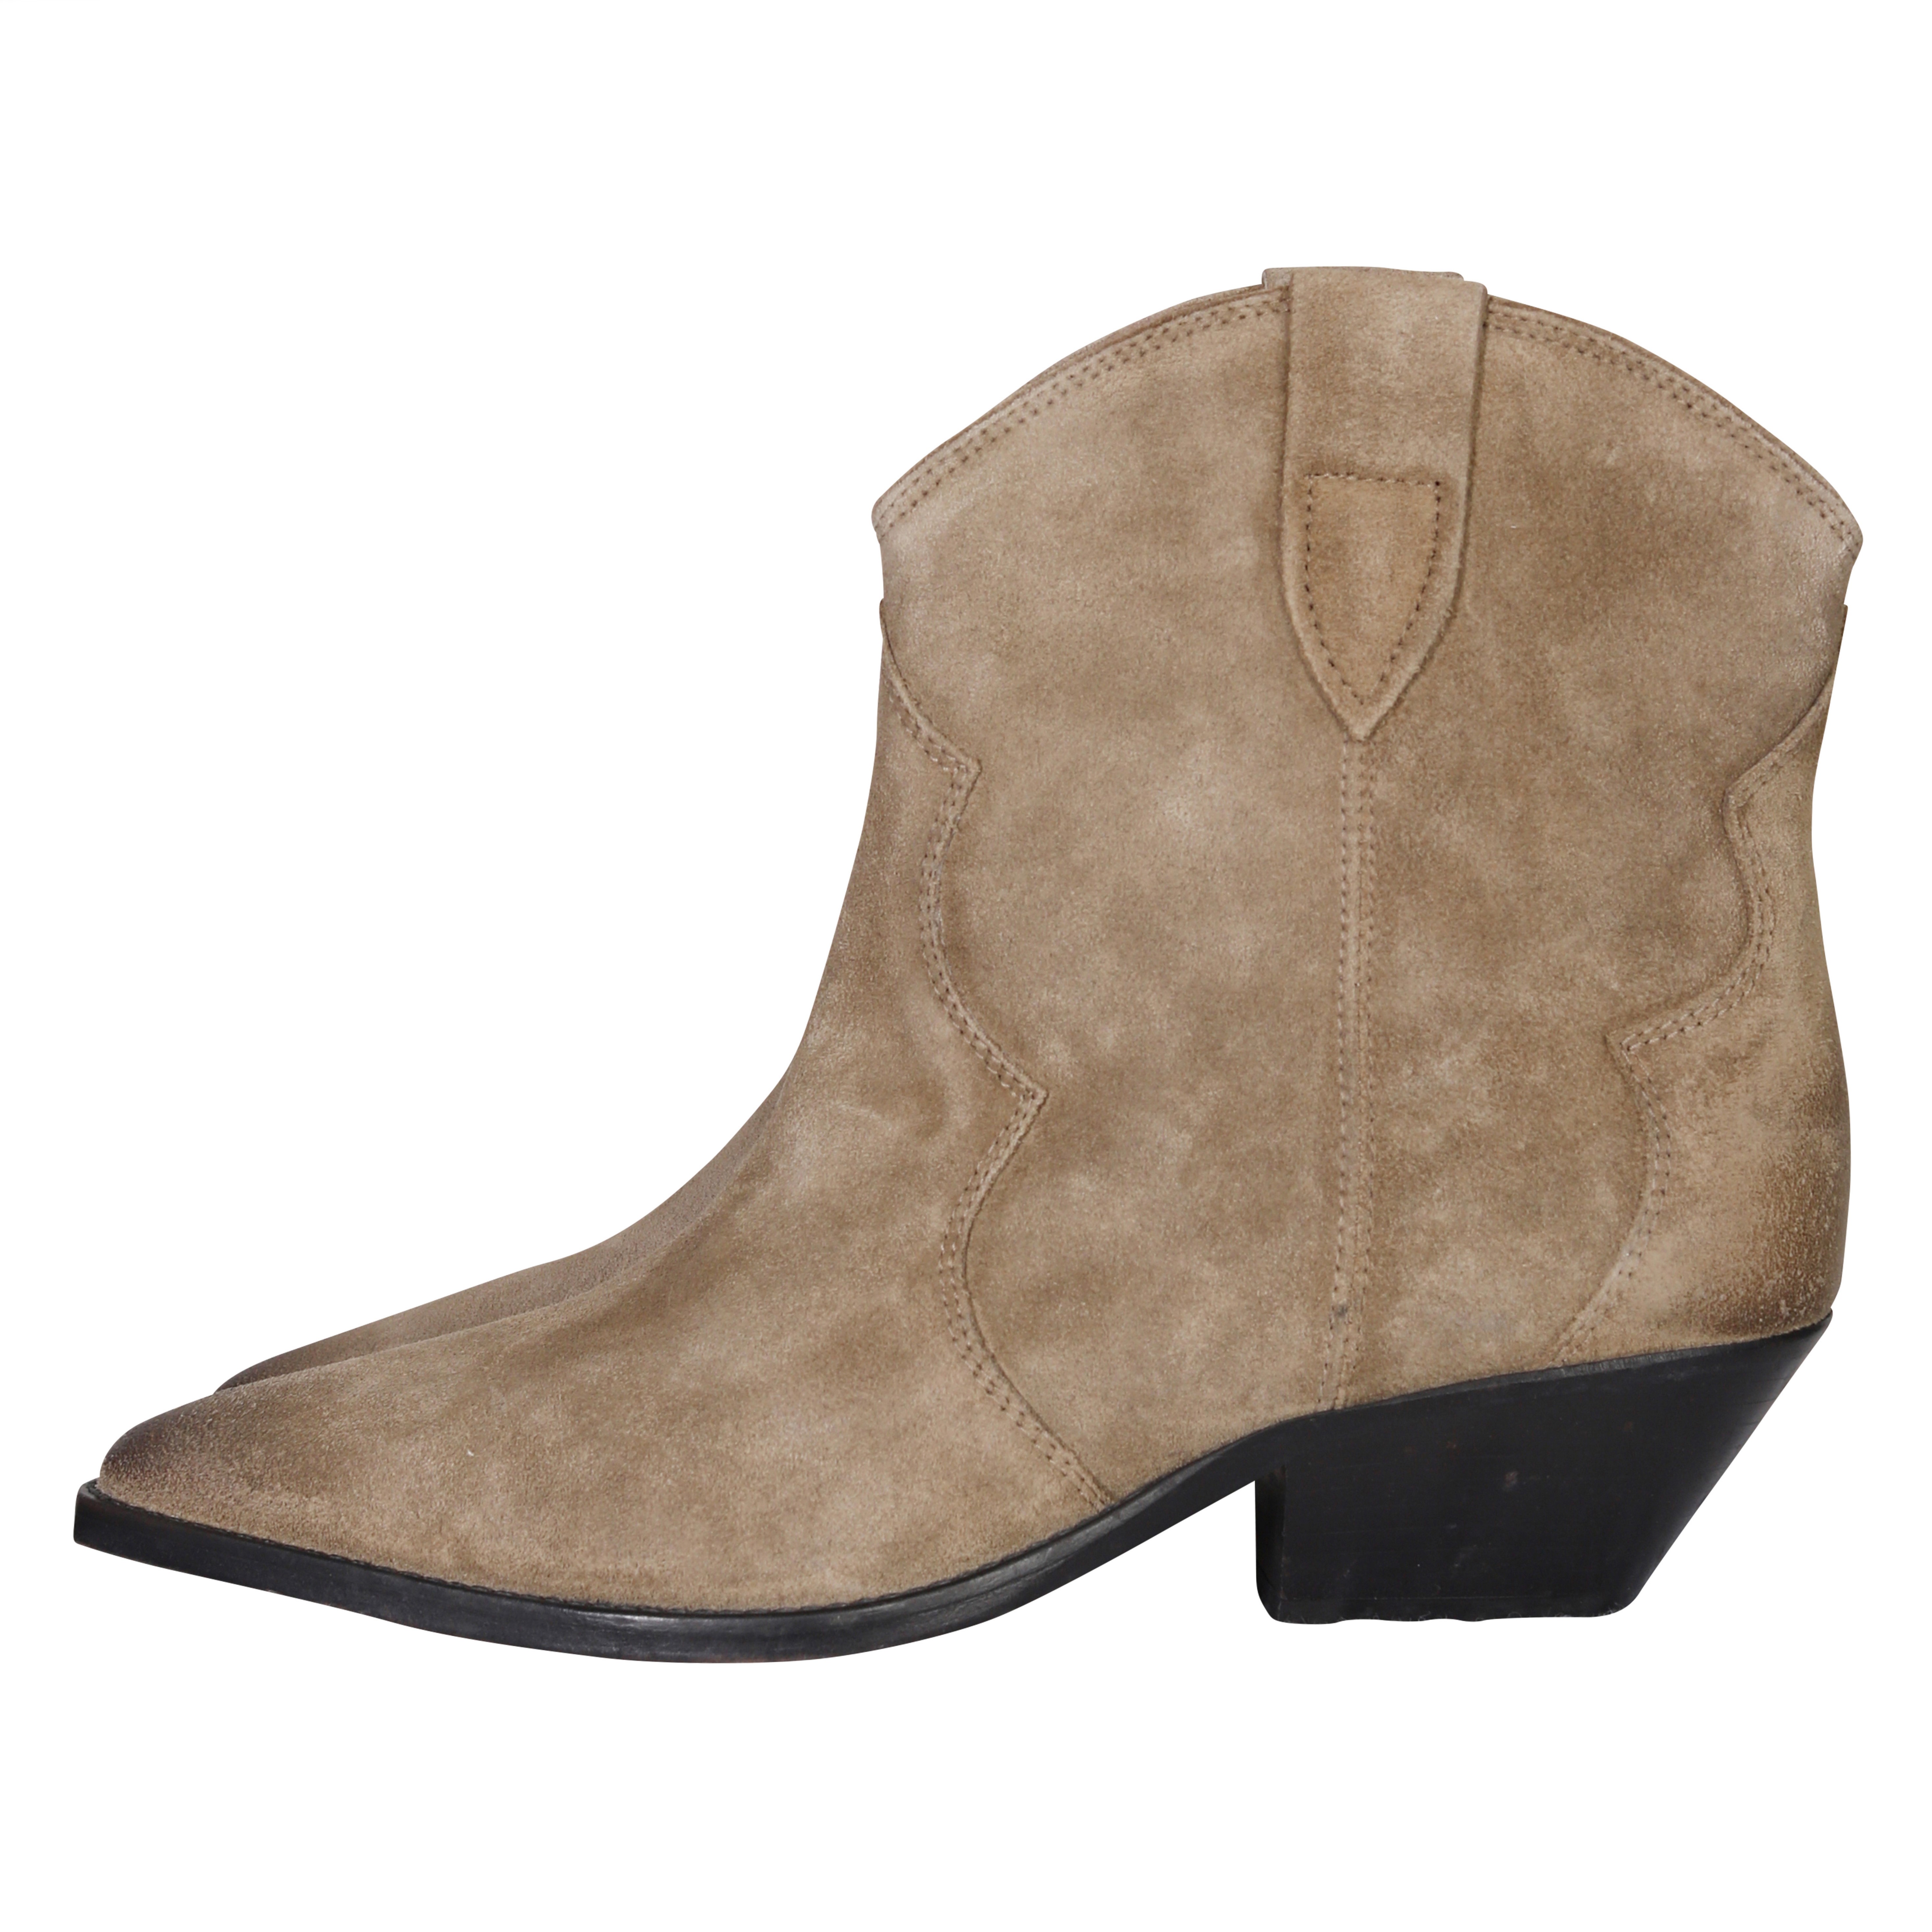 Isabel Marant Dewina Boots in Taupe 38